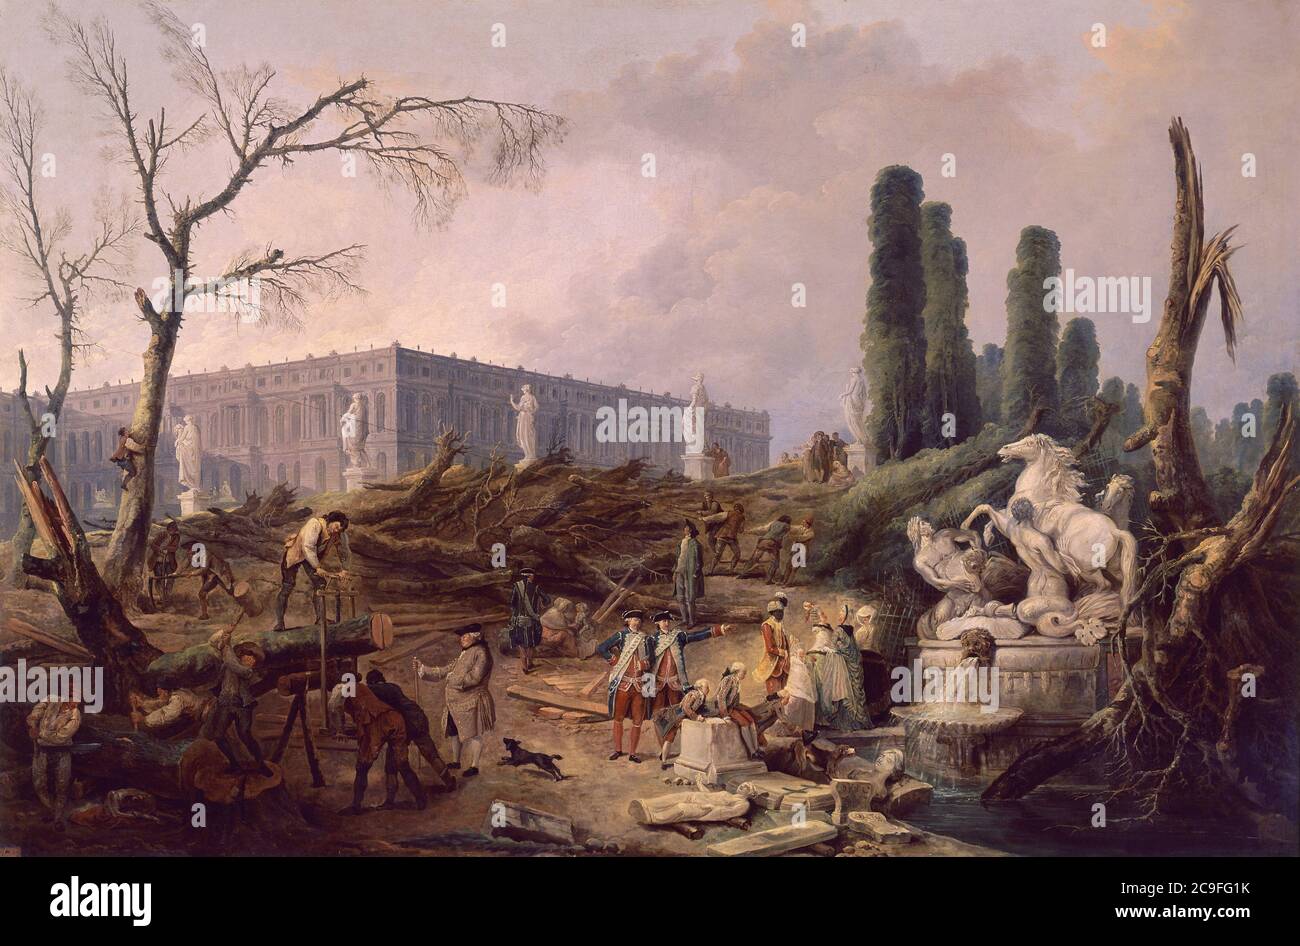 Tree Felling in the Garden of Versailles around the Baths of Apollo - 1775-77 - 124x191 cm - oil on canvas - French Rococo. Author: Robert Hubert. Location: MUSEO PALACIO. Versailles. France. Stock Photo